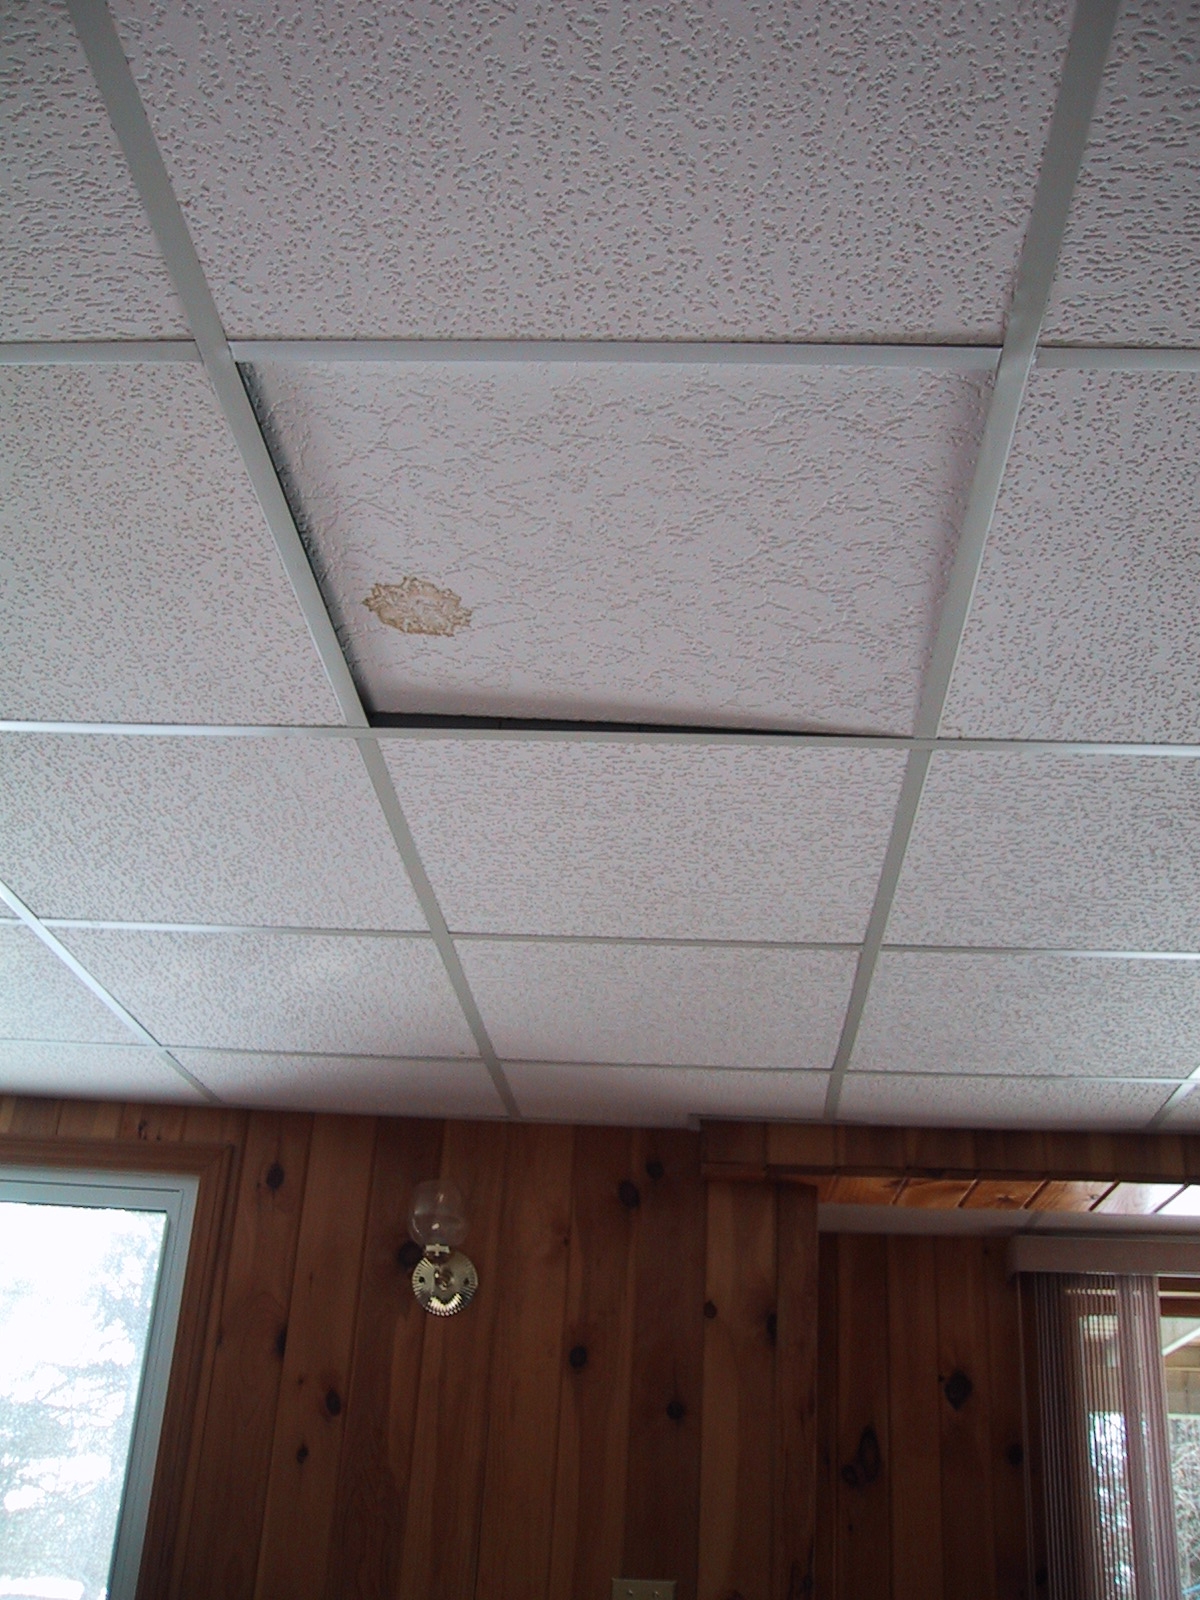 Brown Spots On Ceiling Tiles